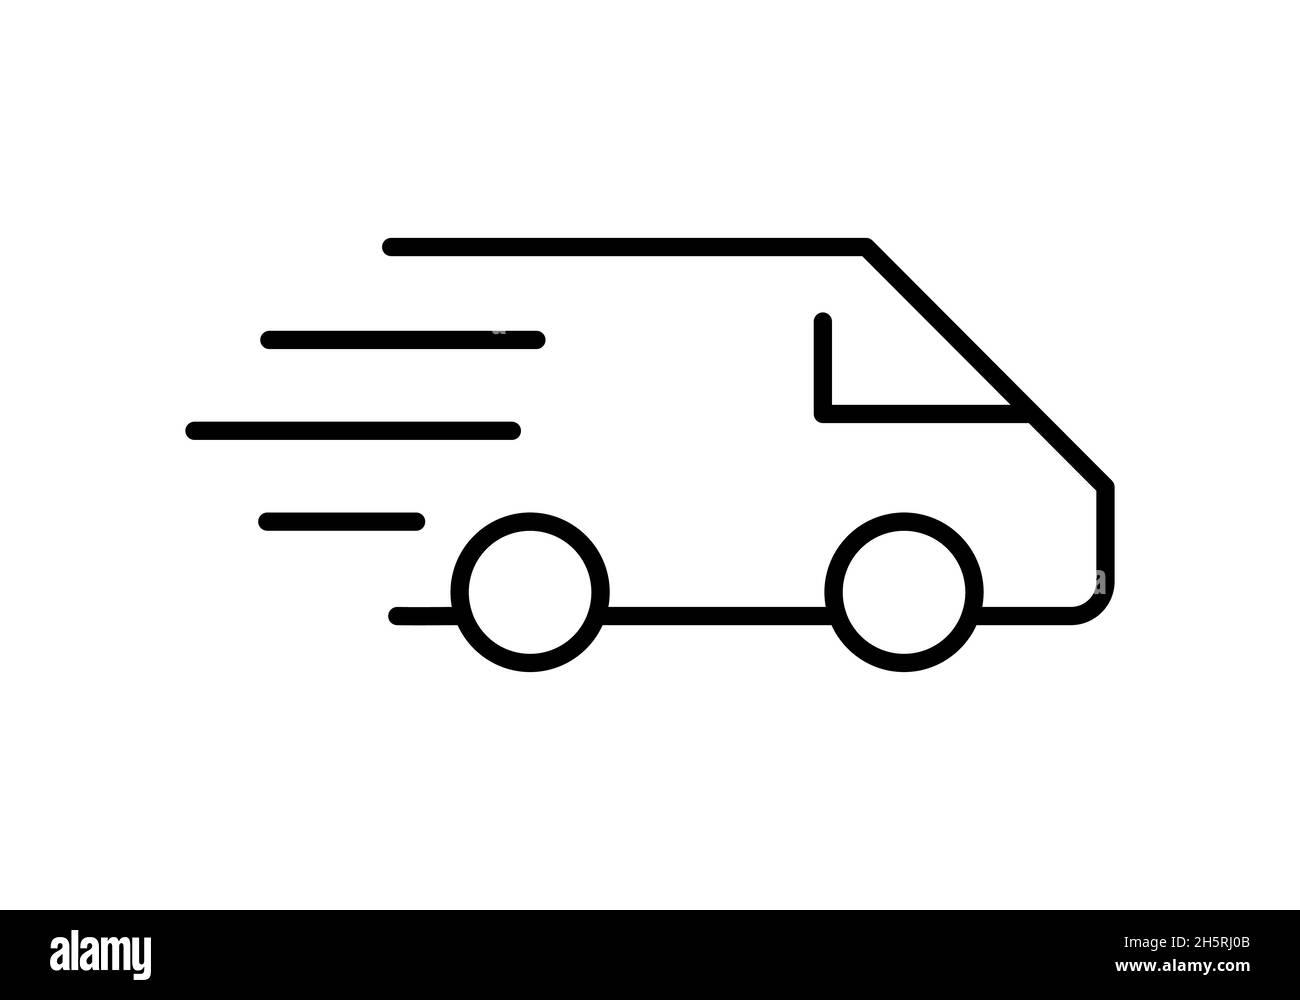 Delivery van line icon. Fast shipping idea. Cargo, distribution, transportation concept. Moving vehicle with lines symbolizing speed. Vector flat Stock Vector